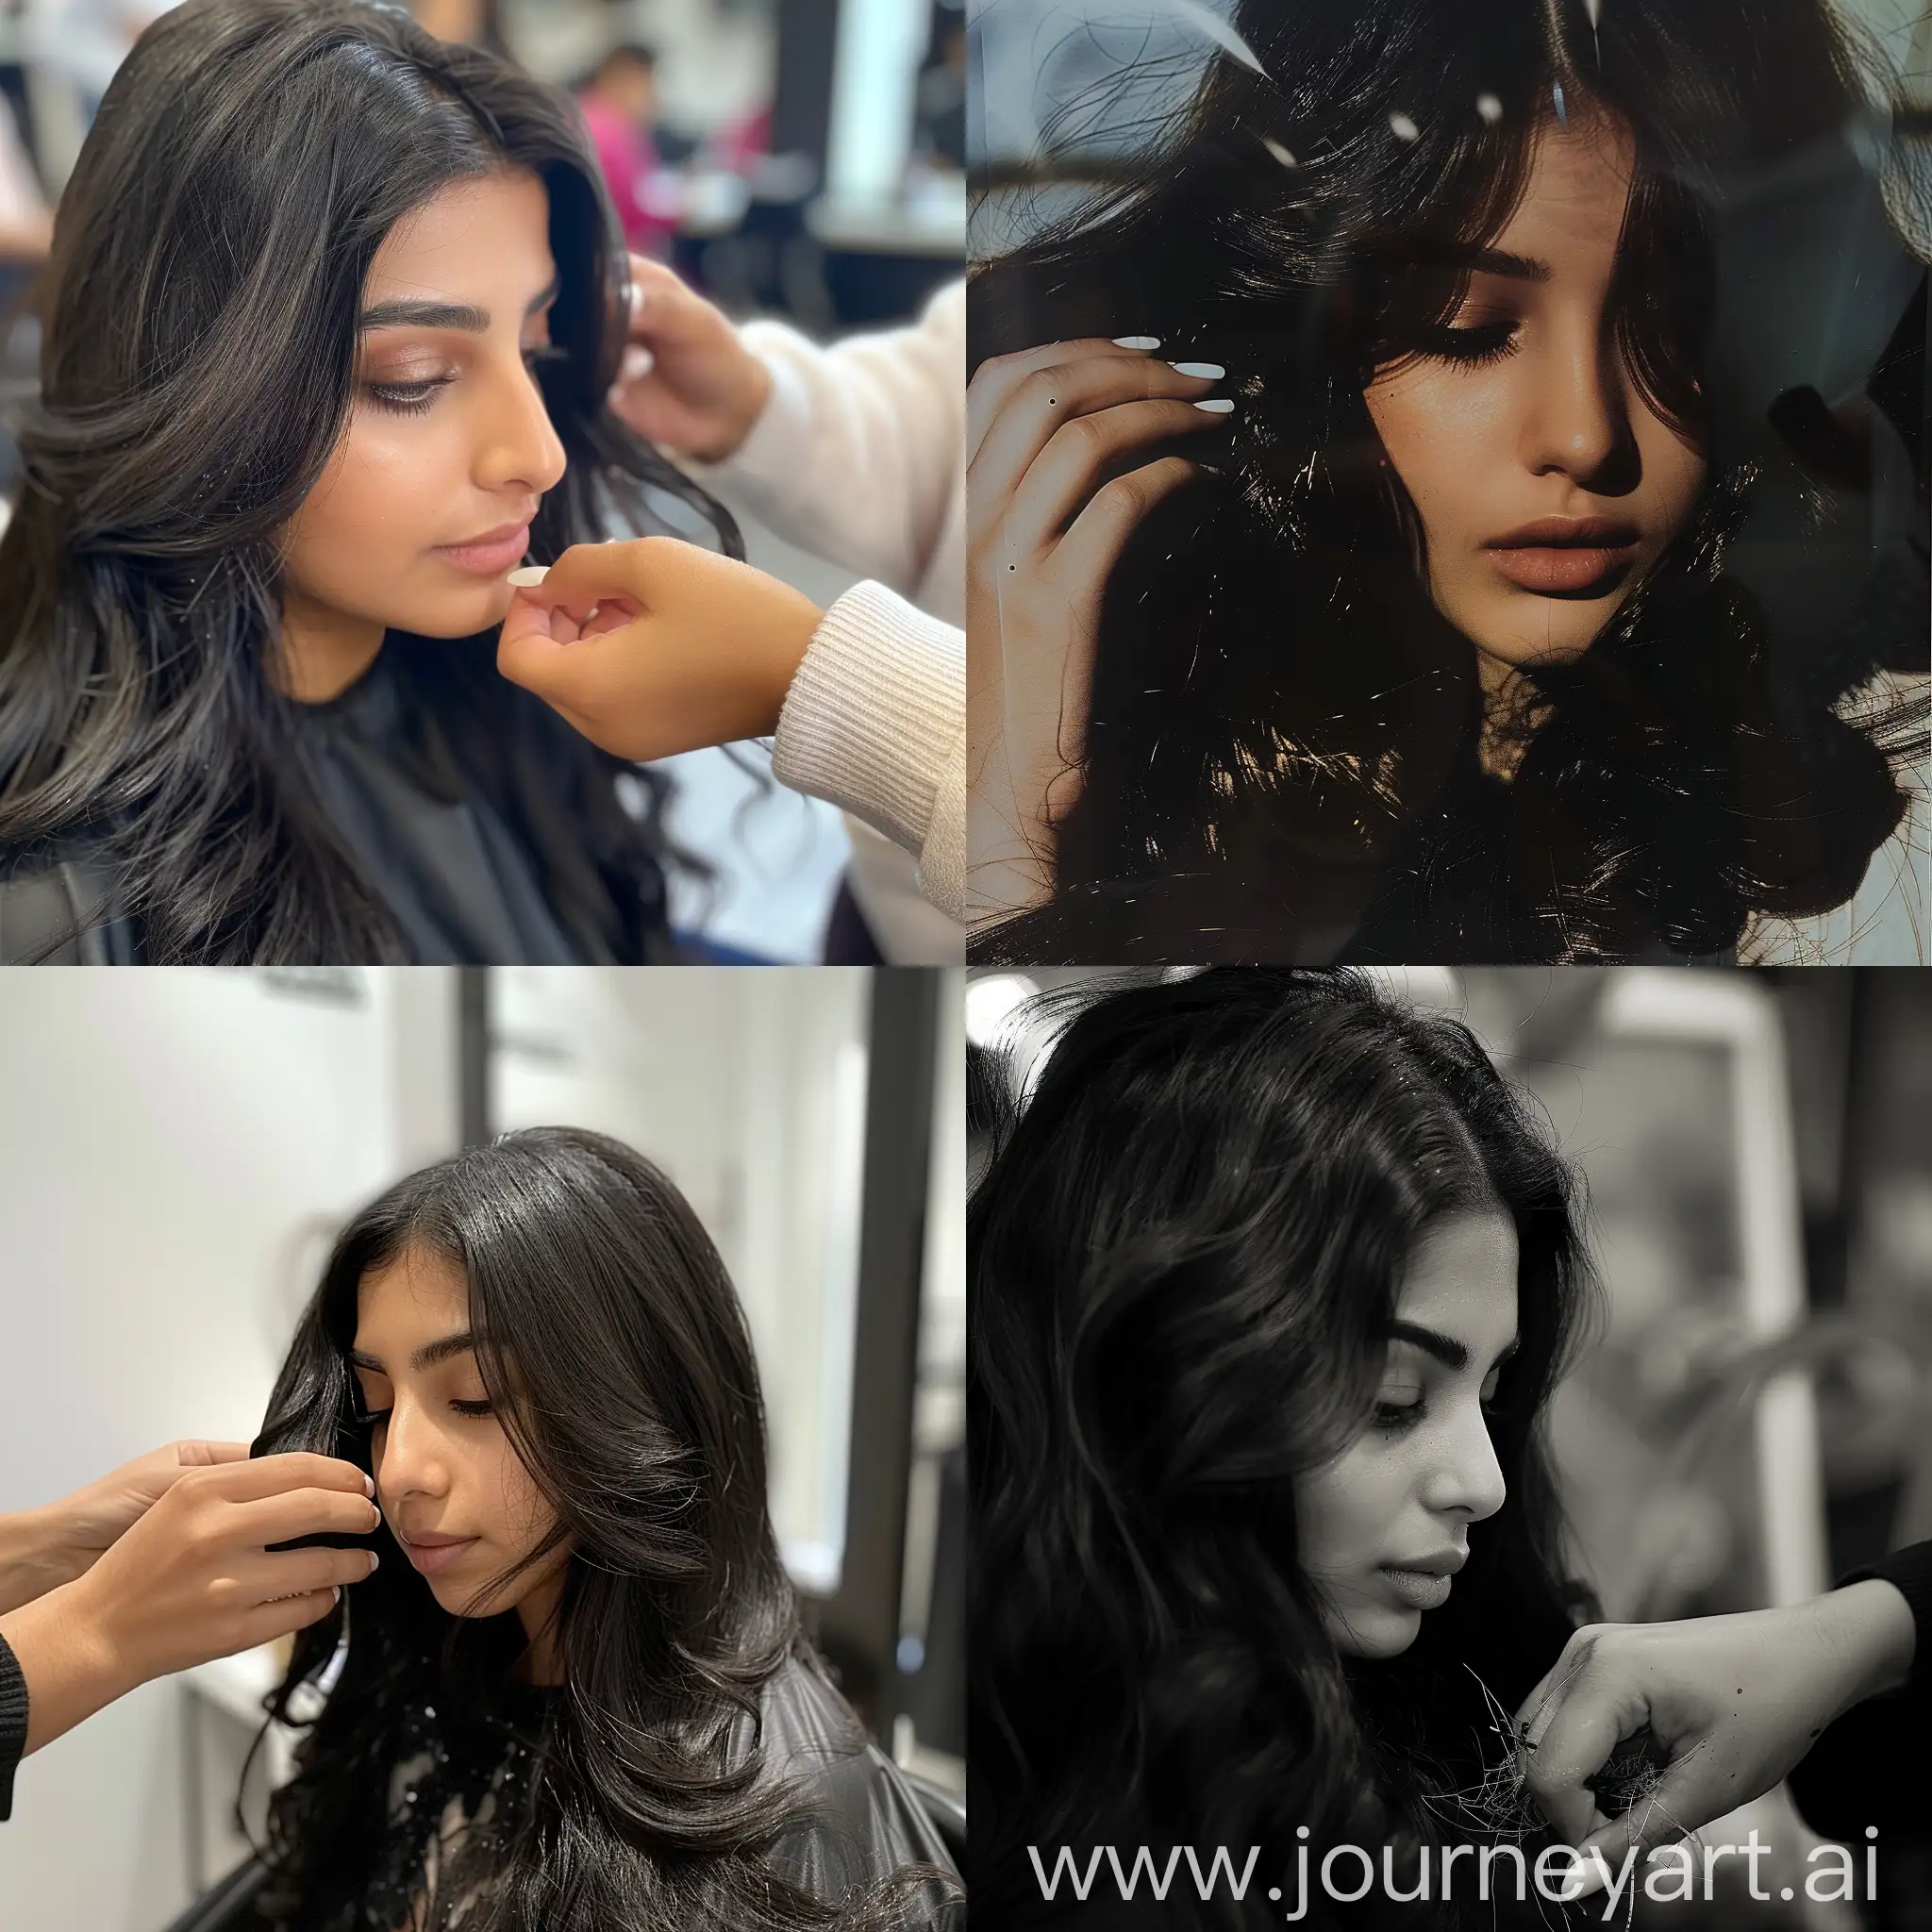 Young-Iranian-Model-with-Luscious-Black-Hair-Getting-Hair-Done-at-Salon